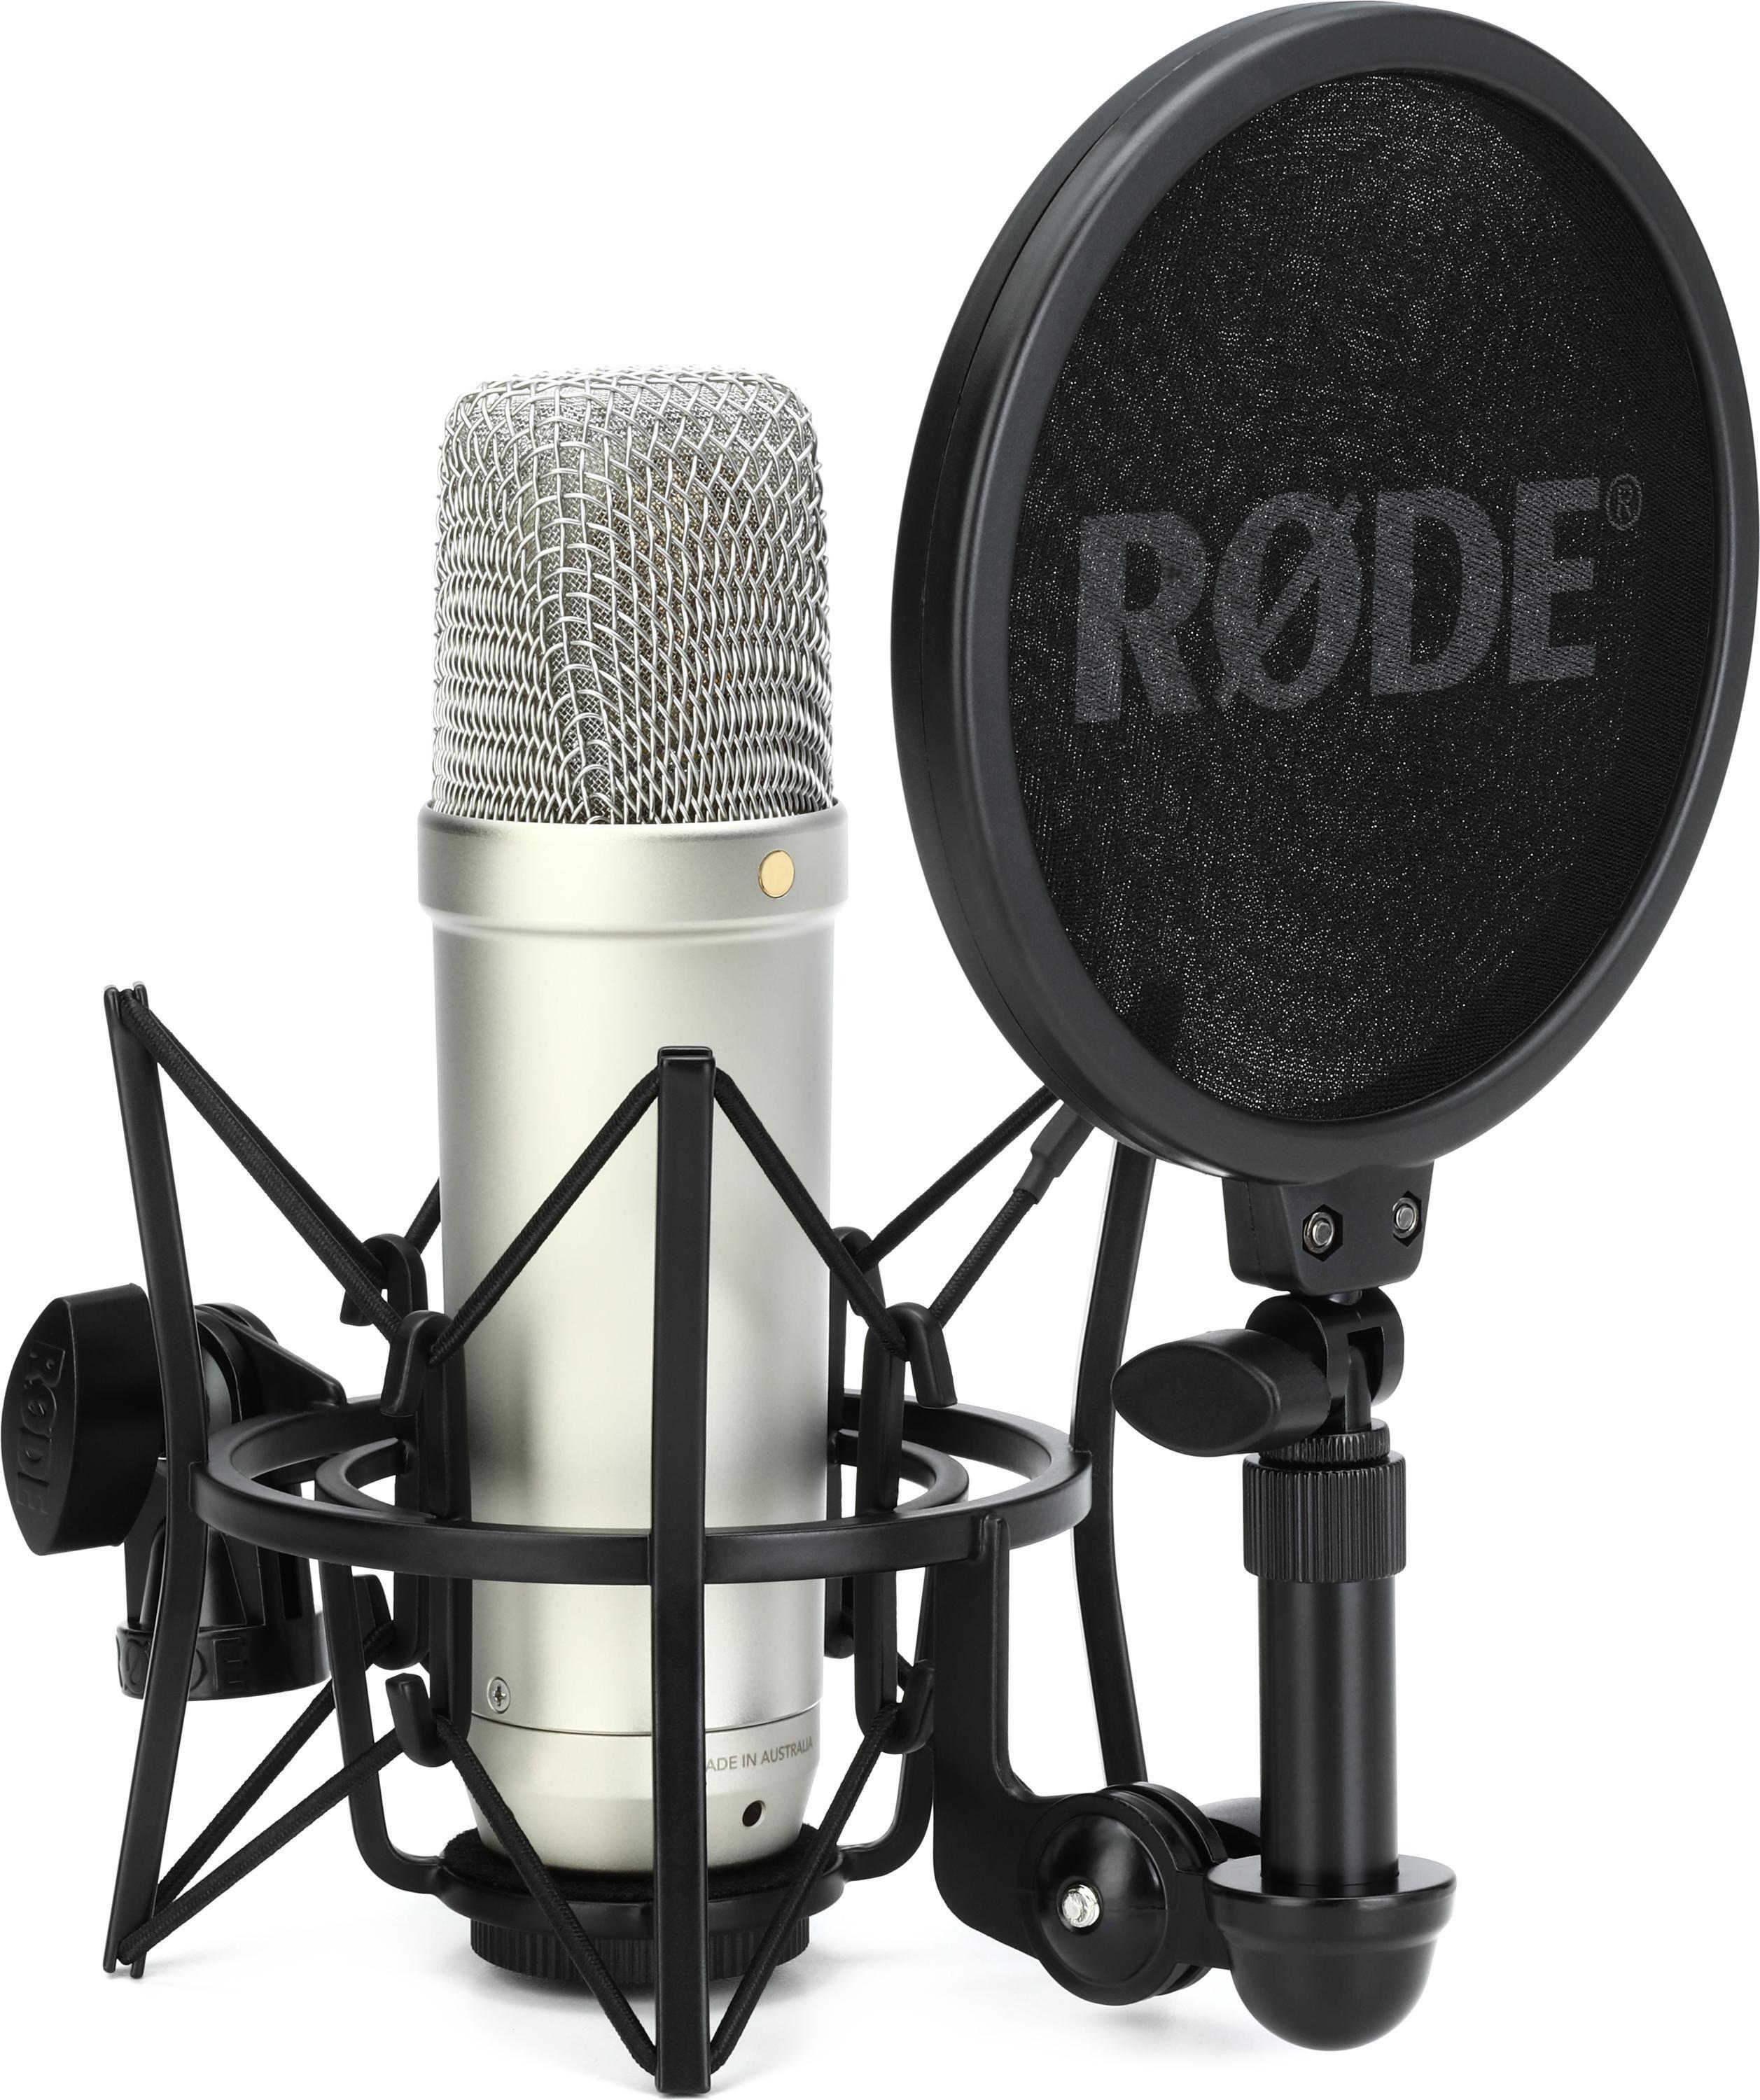 Bundled Item: Rode NT1 5th Generation Condenser Microphone with SM6 Shockmount and Pop Filter - Silver